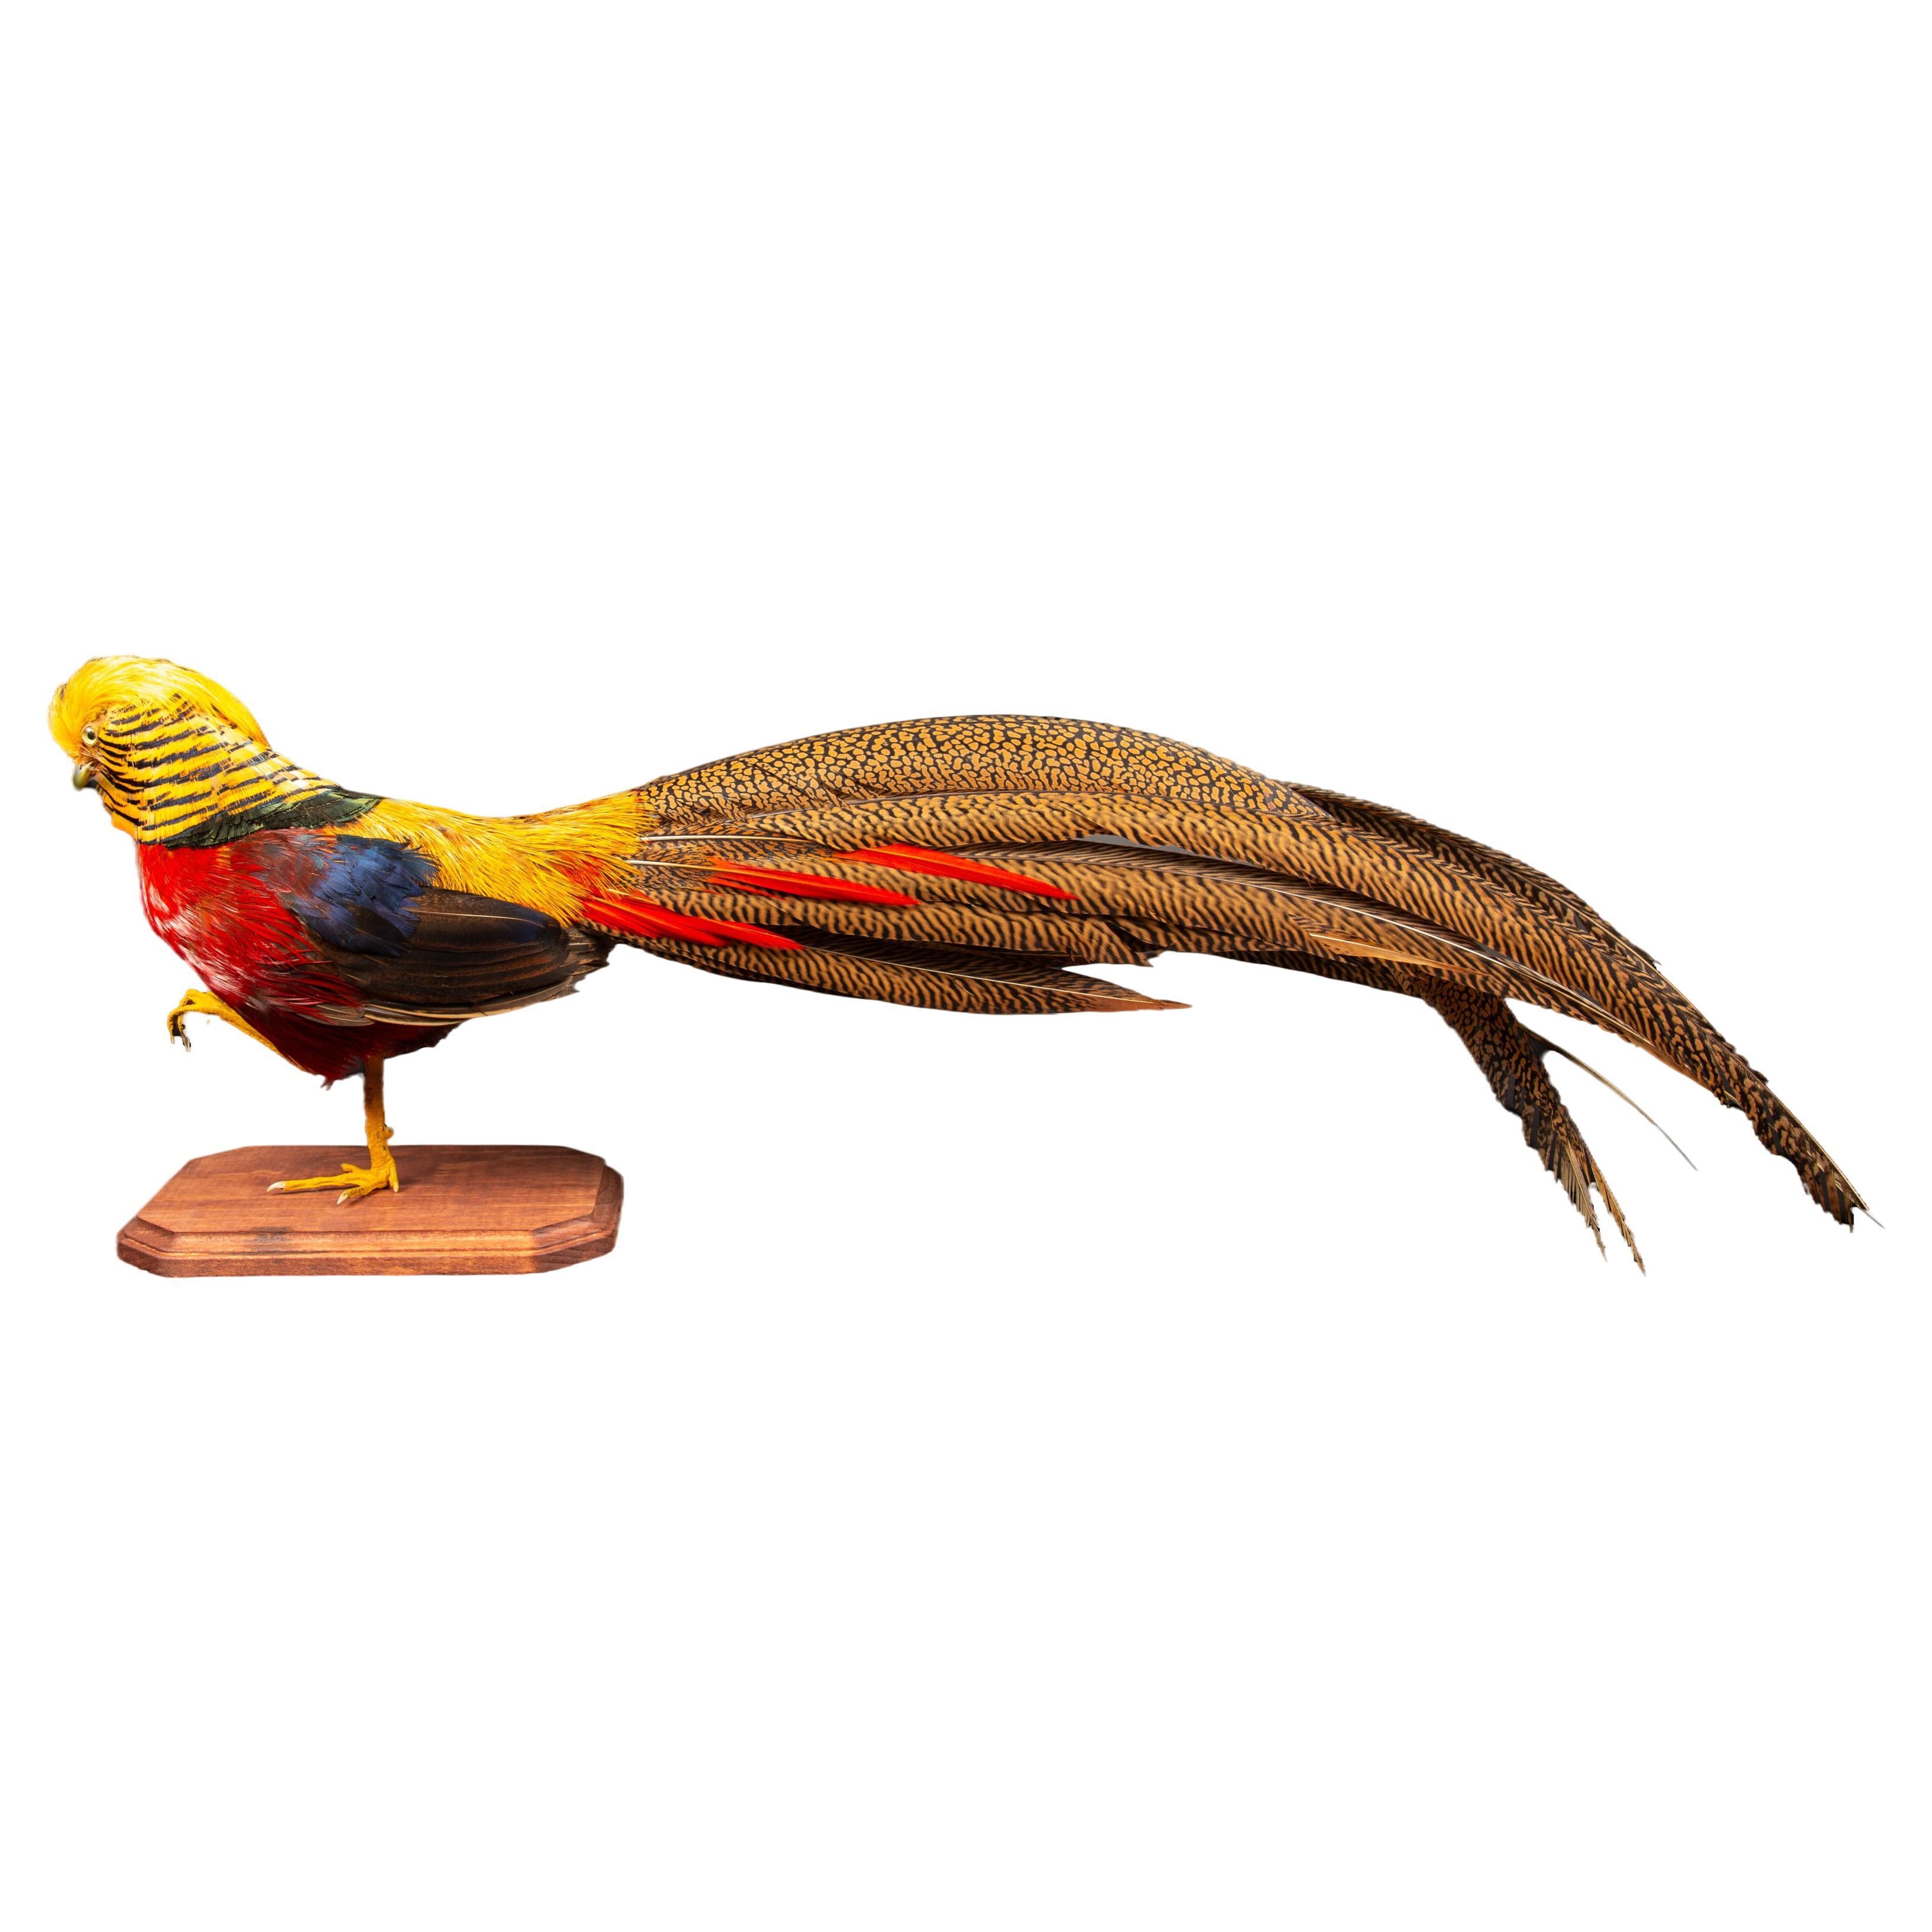 Taxidermy Red Golden Pheasant